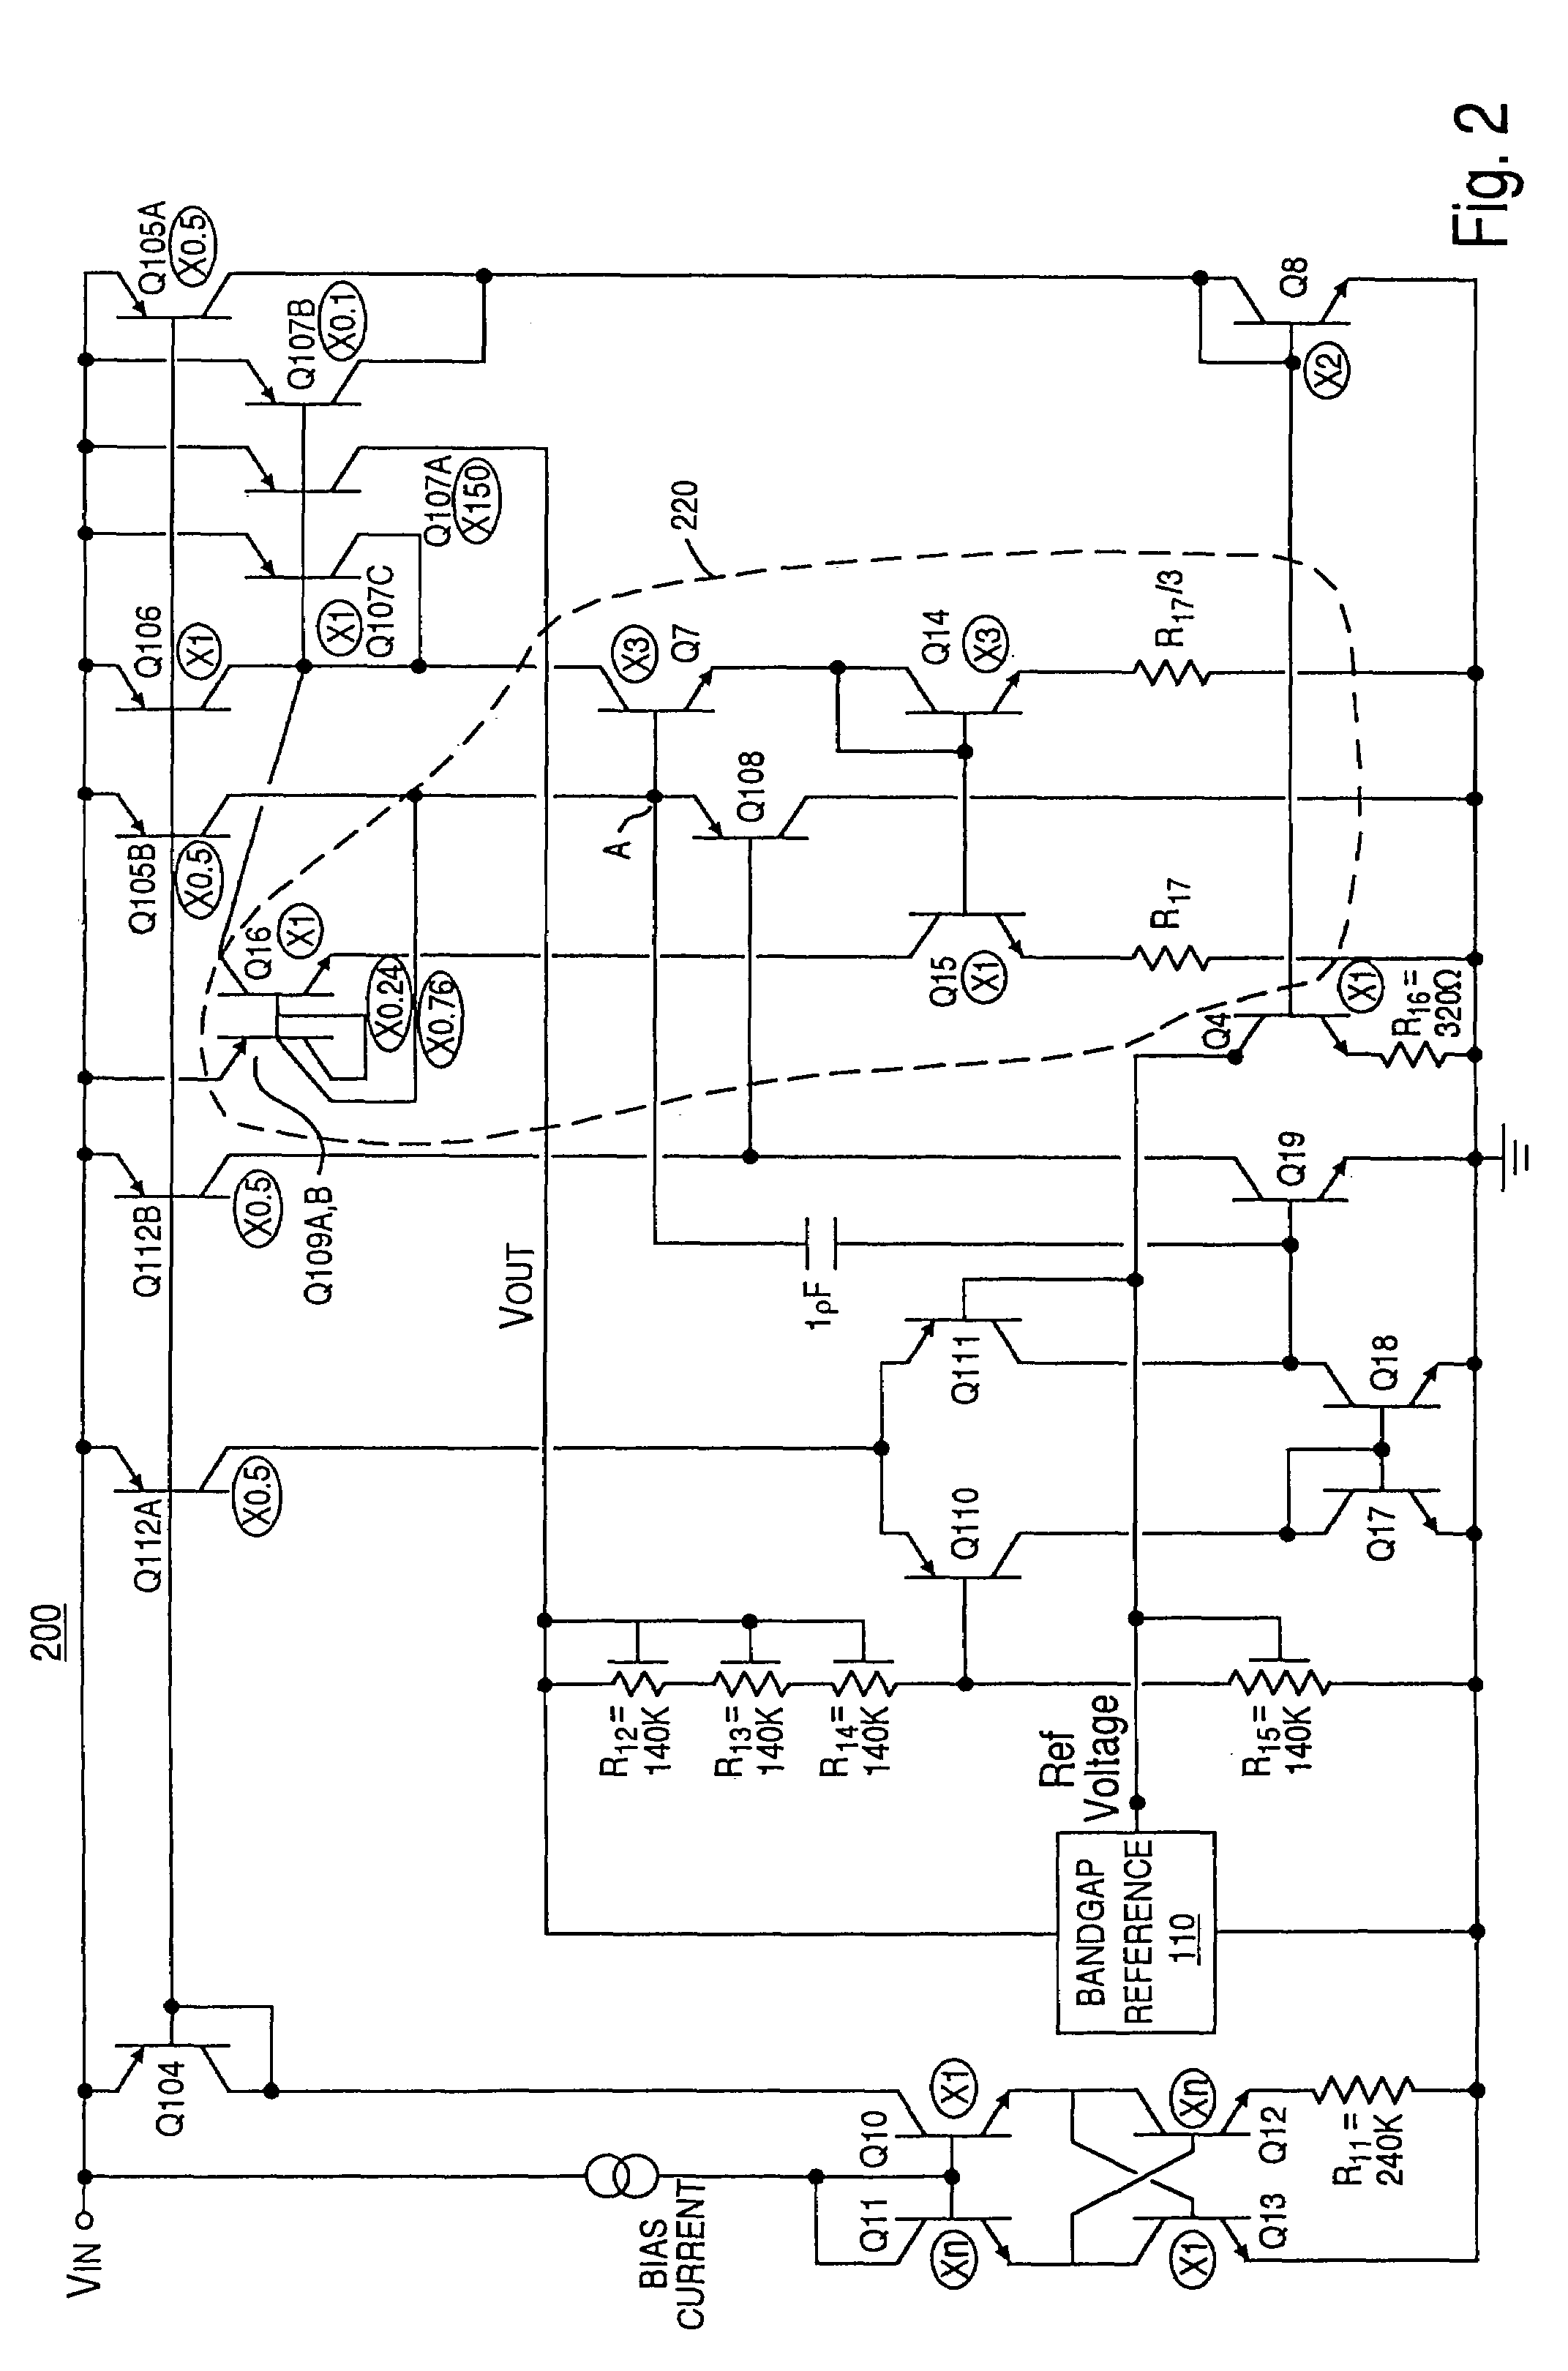 Difference amplifier for regulating voltage